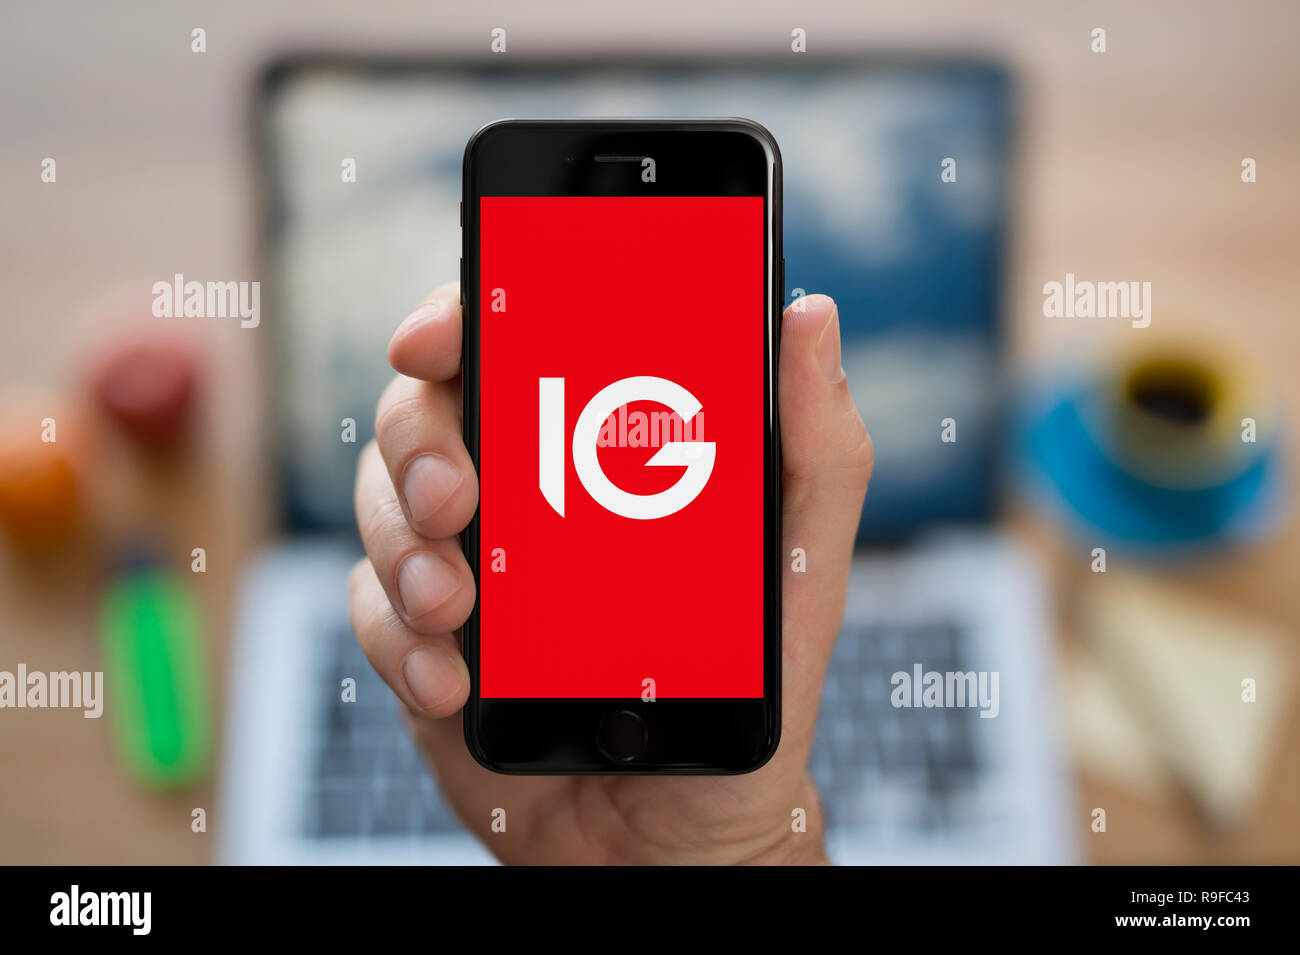 A man looks at his iPhone which displays the IG logo (Editorial use only). Stock Photo